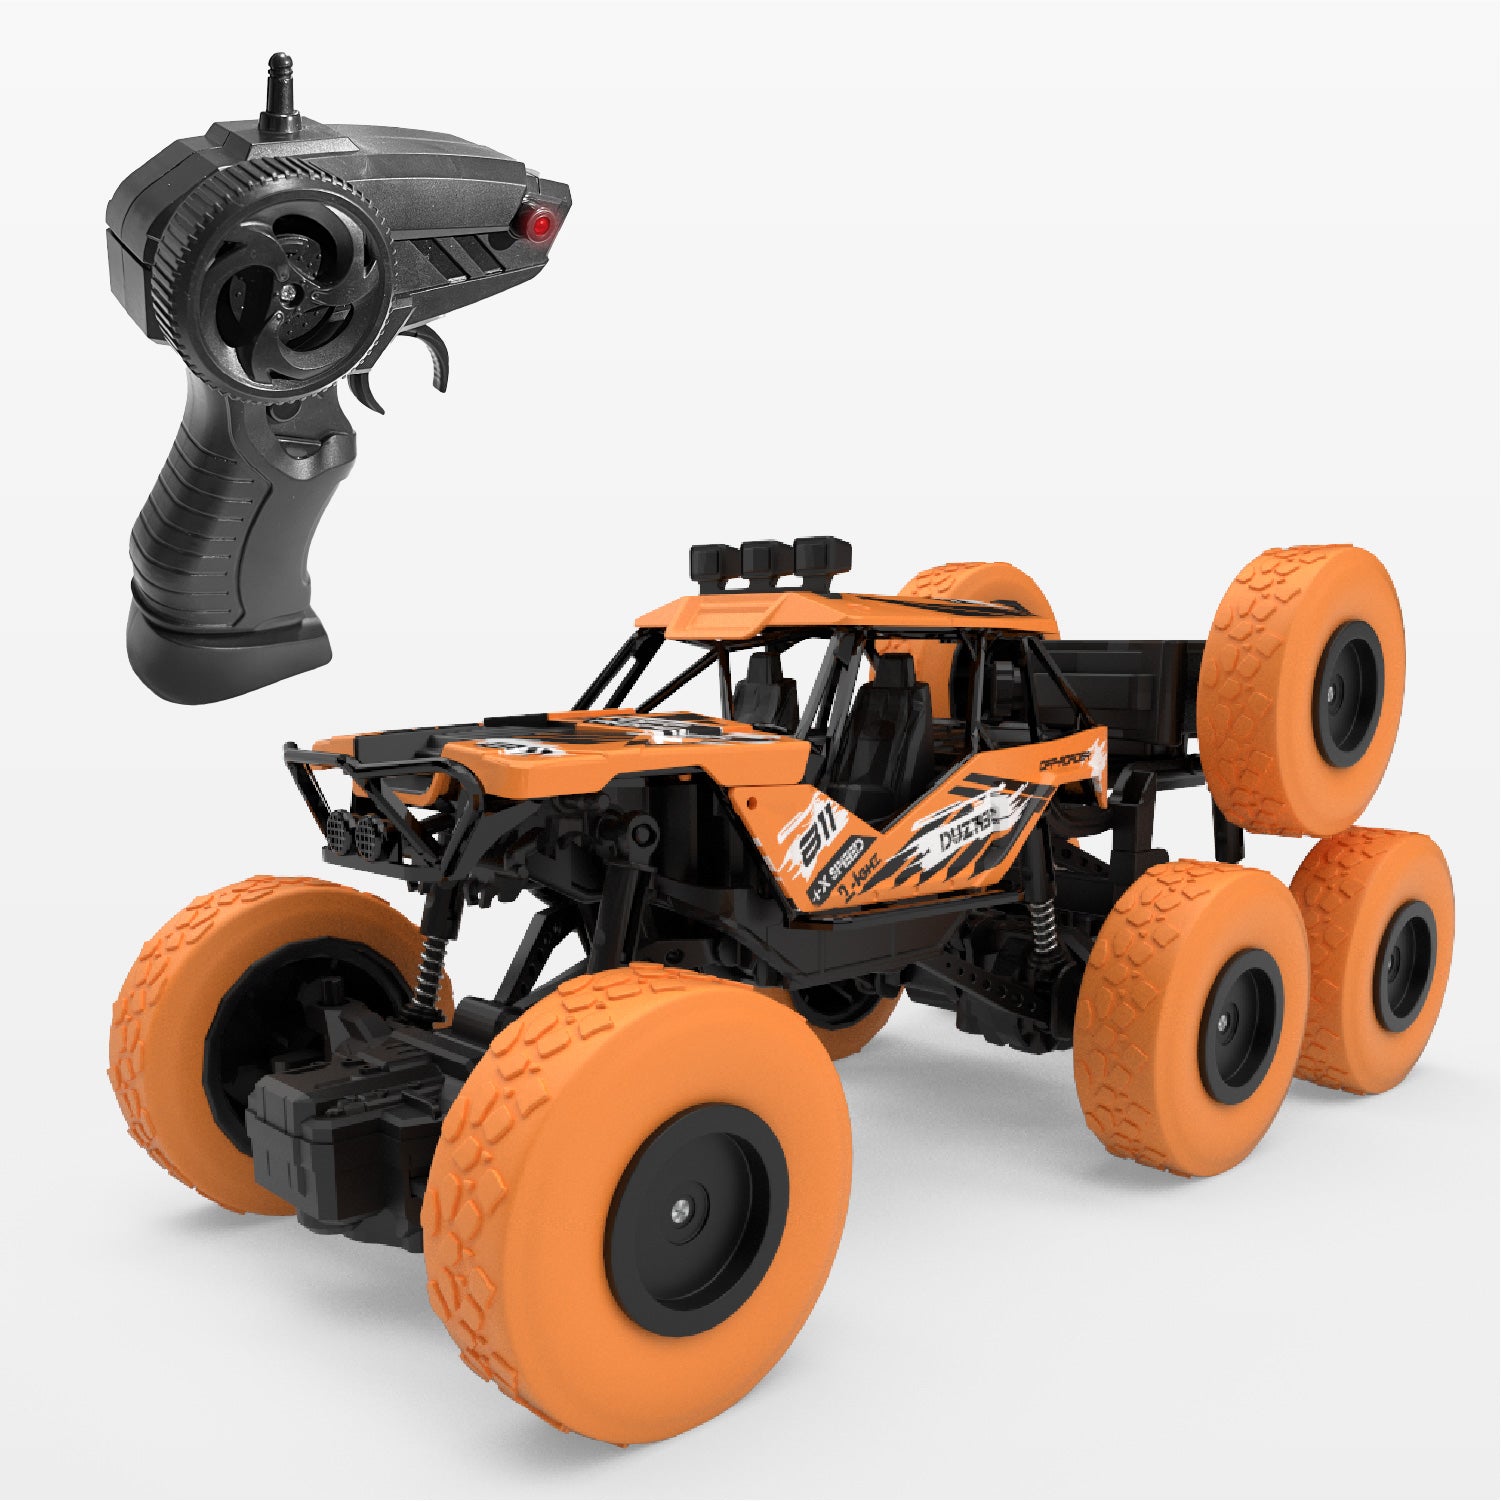 DUZTER - Villey 8.0 THE OFF ROADER - RC car with Rechargeable Battery - Orange